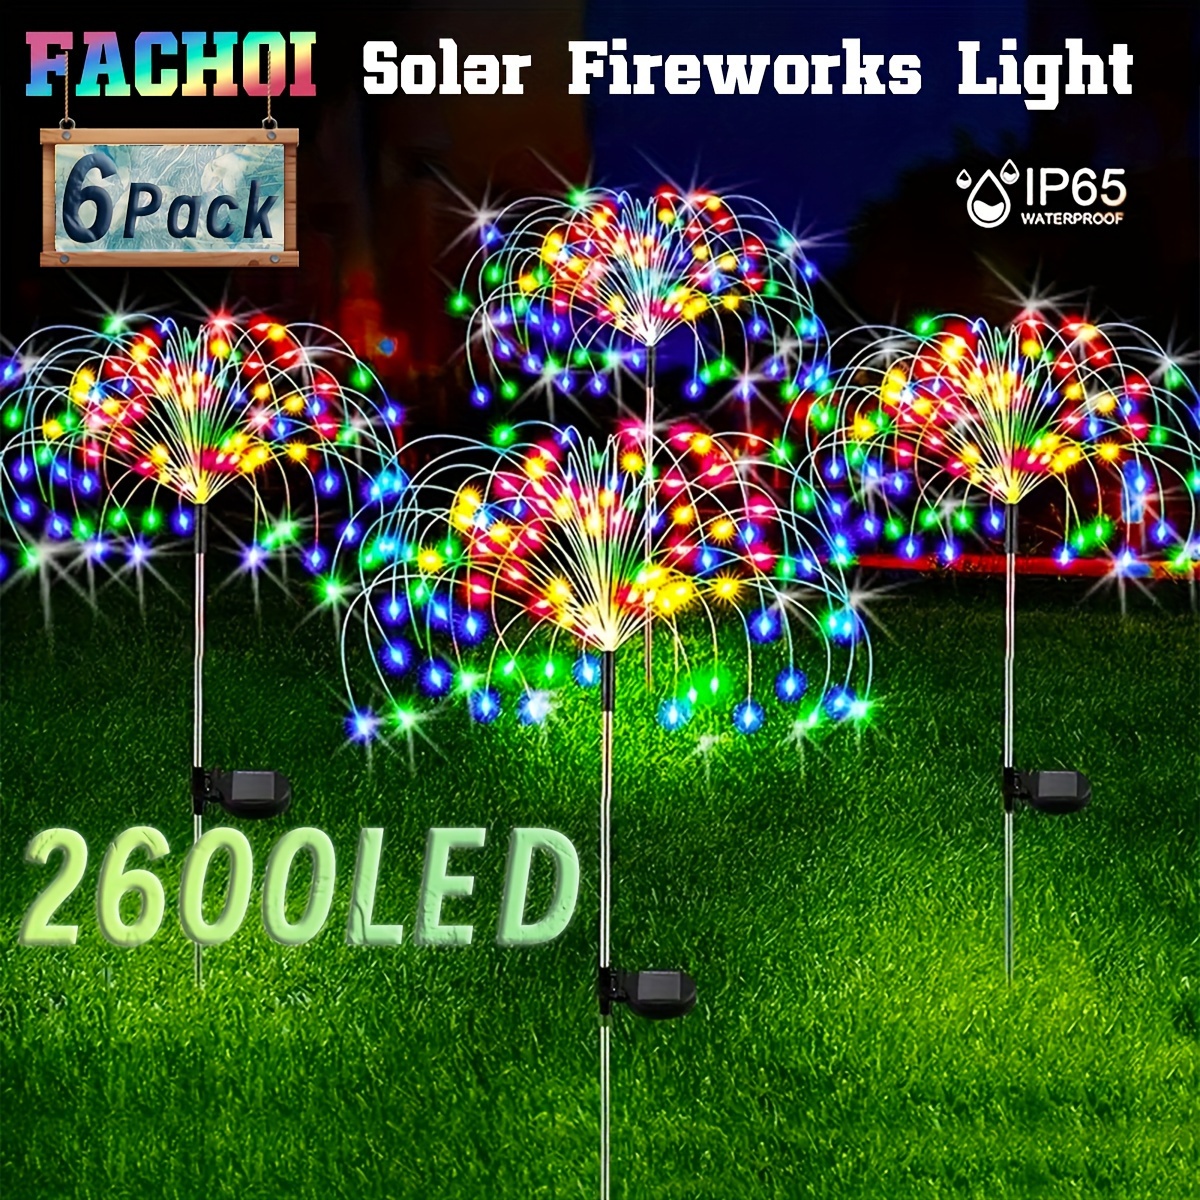 

6pack 2600led Solar Firework Lights, Outdoor, Diy Ip65 Waterprof Solar String Lights For Patio, Yard Decoration Yard Pathway Patio (warm White/multicolour)4pack/2pack